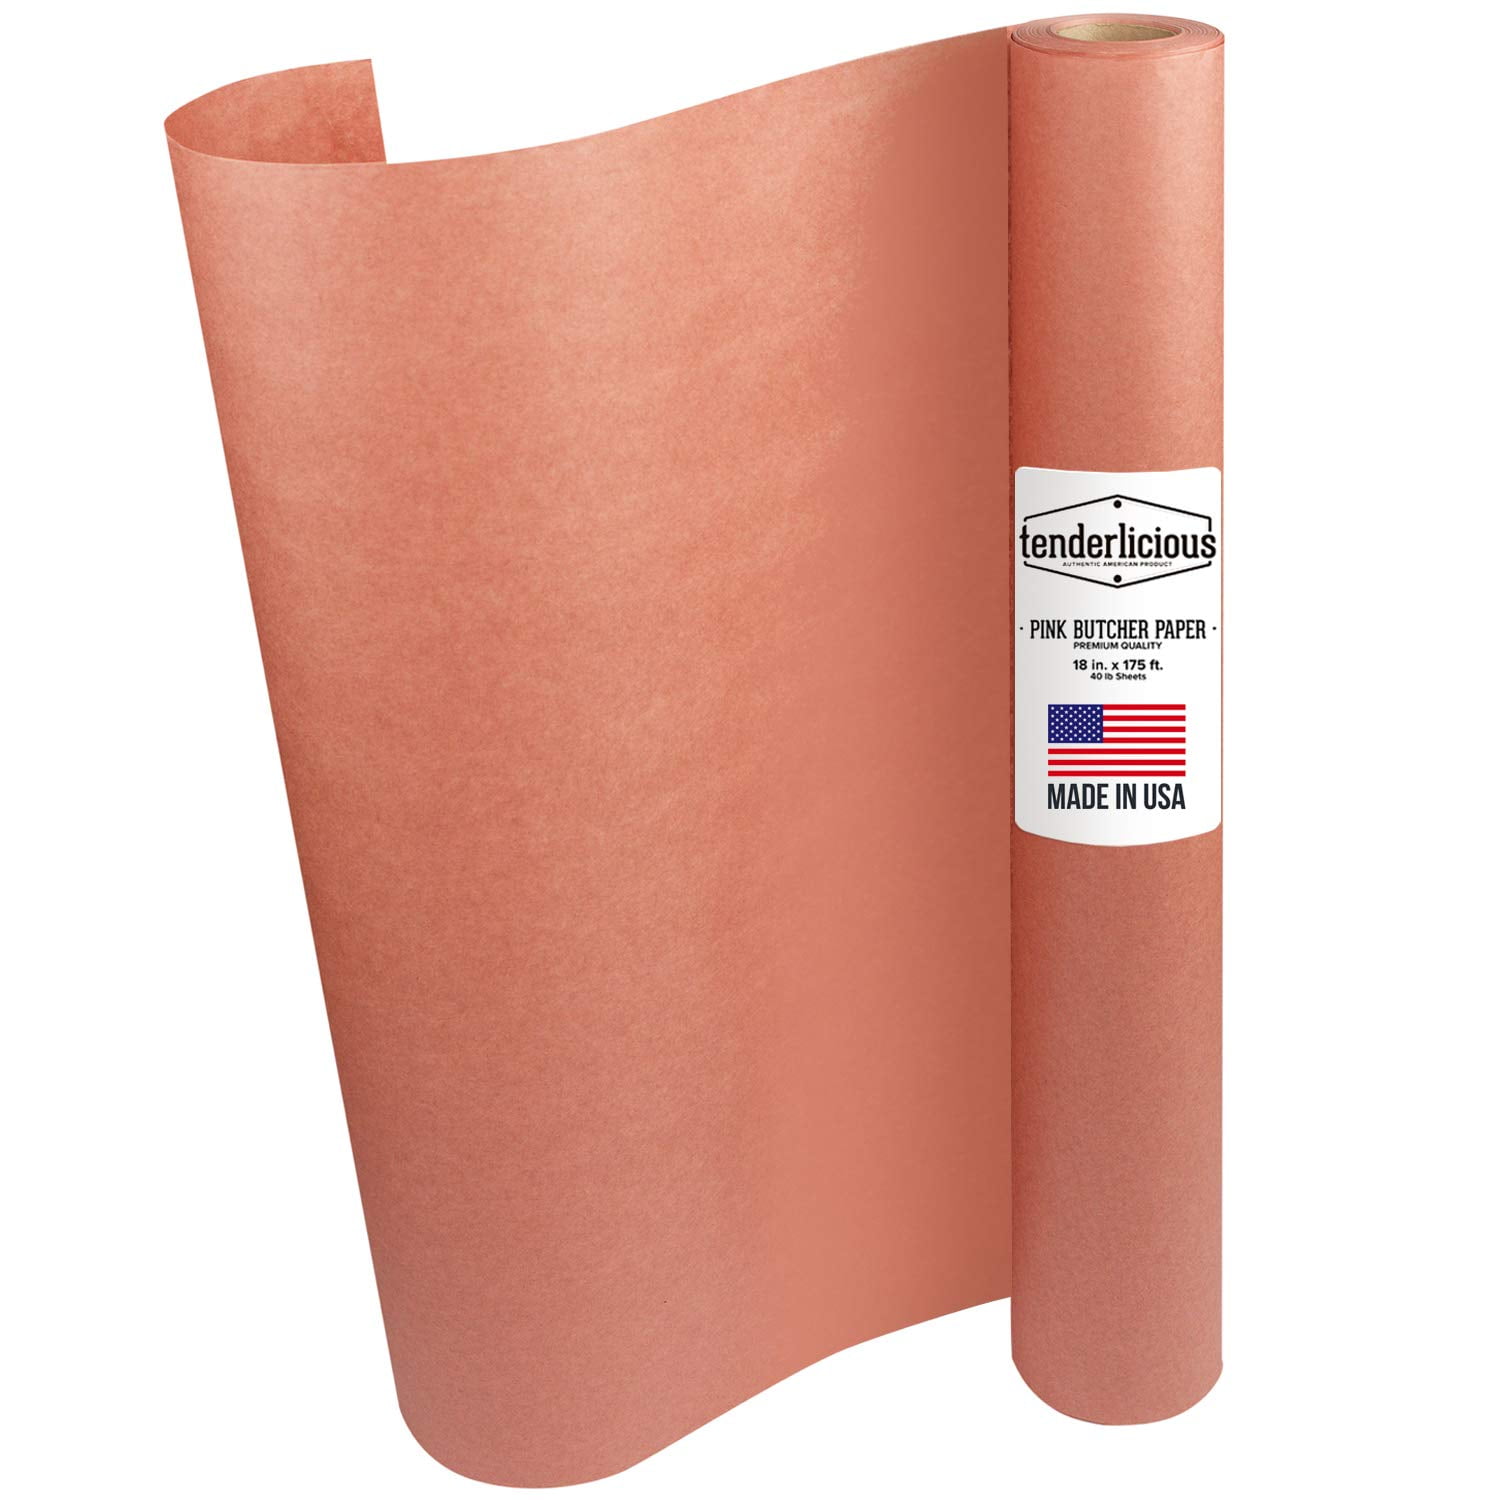 Bryco Goods Pink Butcher Paper Roll - 24 Inch by 175 Foot Roll of Food  Grade Peach Butcher Paper for Smoking Meat - Unbleached, Unwaxed and  Uncoated 